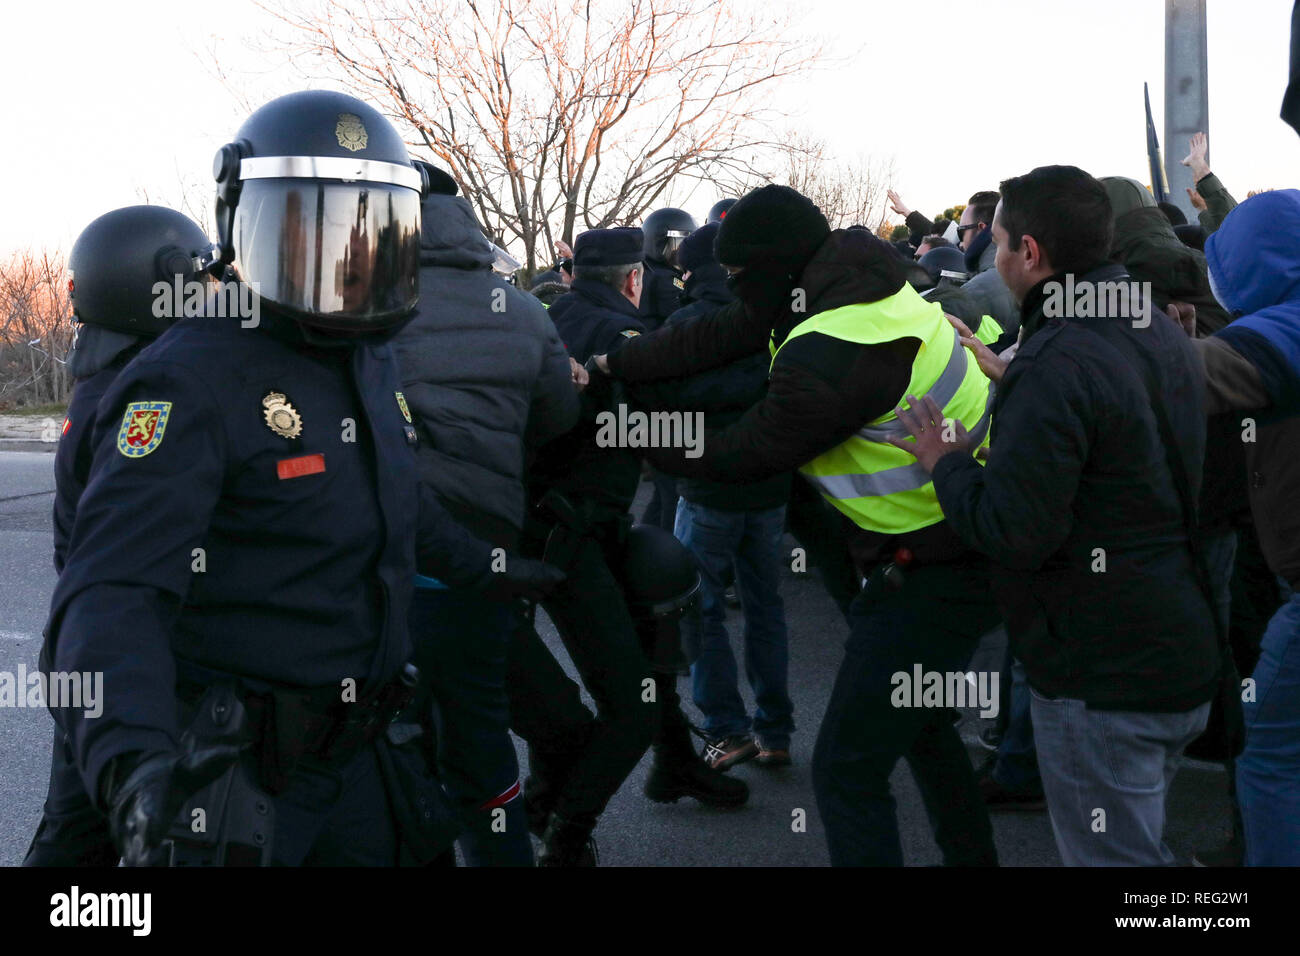 Madrid, Spain. 21st Jan, 2019. The protesters try to break the police barrier and there is pushing. In Madrid, they have now cut the M-11 near Ifema, in both directions. The taxi drivers from Madrid, who have started a strike on Monday, have announced that they maintain the indefinite strike after reaching no pre-agreement with the president of the Community of Madrid. Credit: Jesús Hellin/Alamy Live News Stock Photo